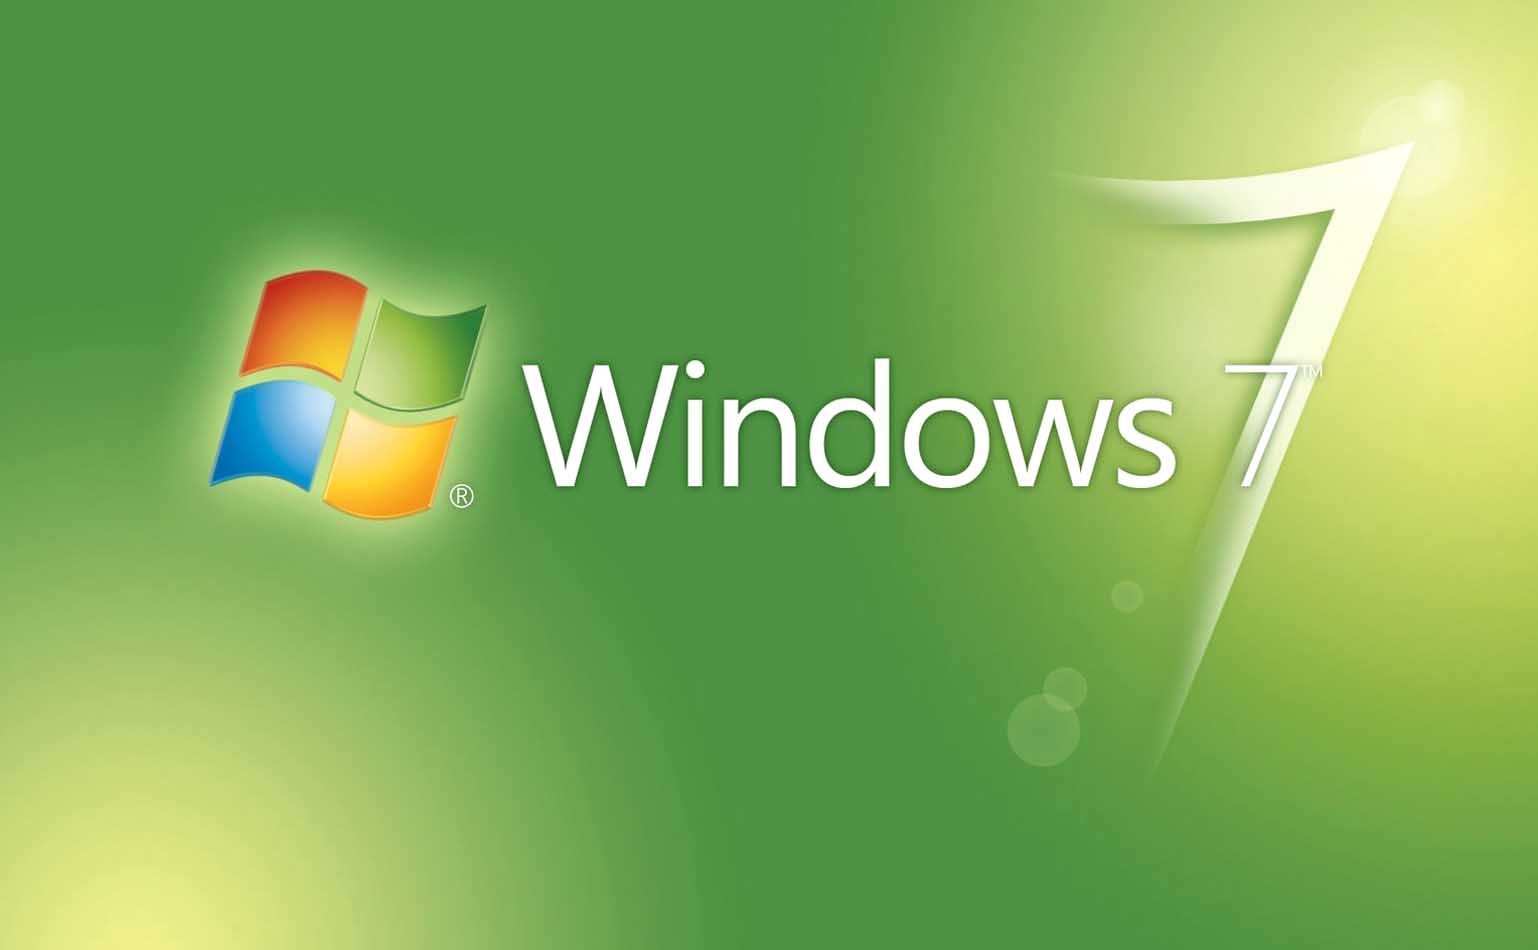 Windows 7 Ultimate Wallpapers Free Download